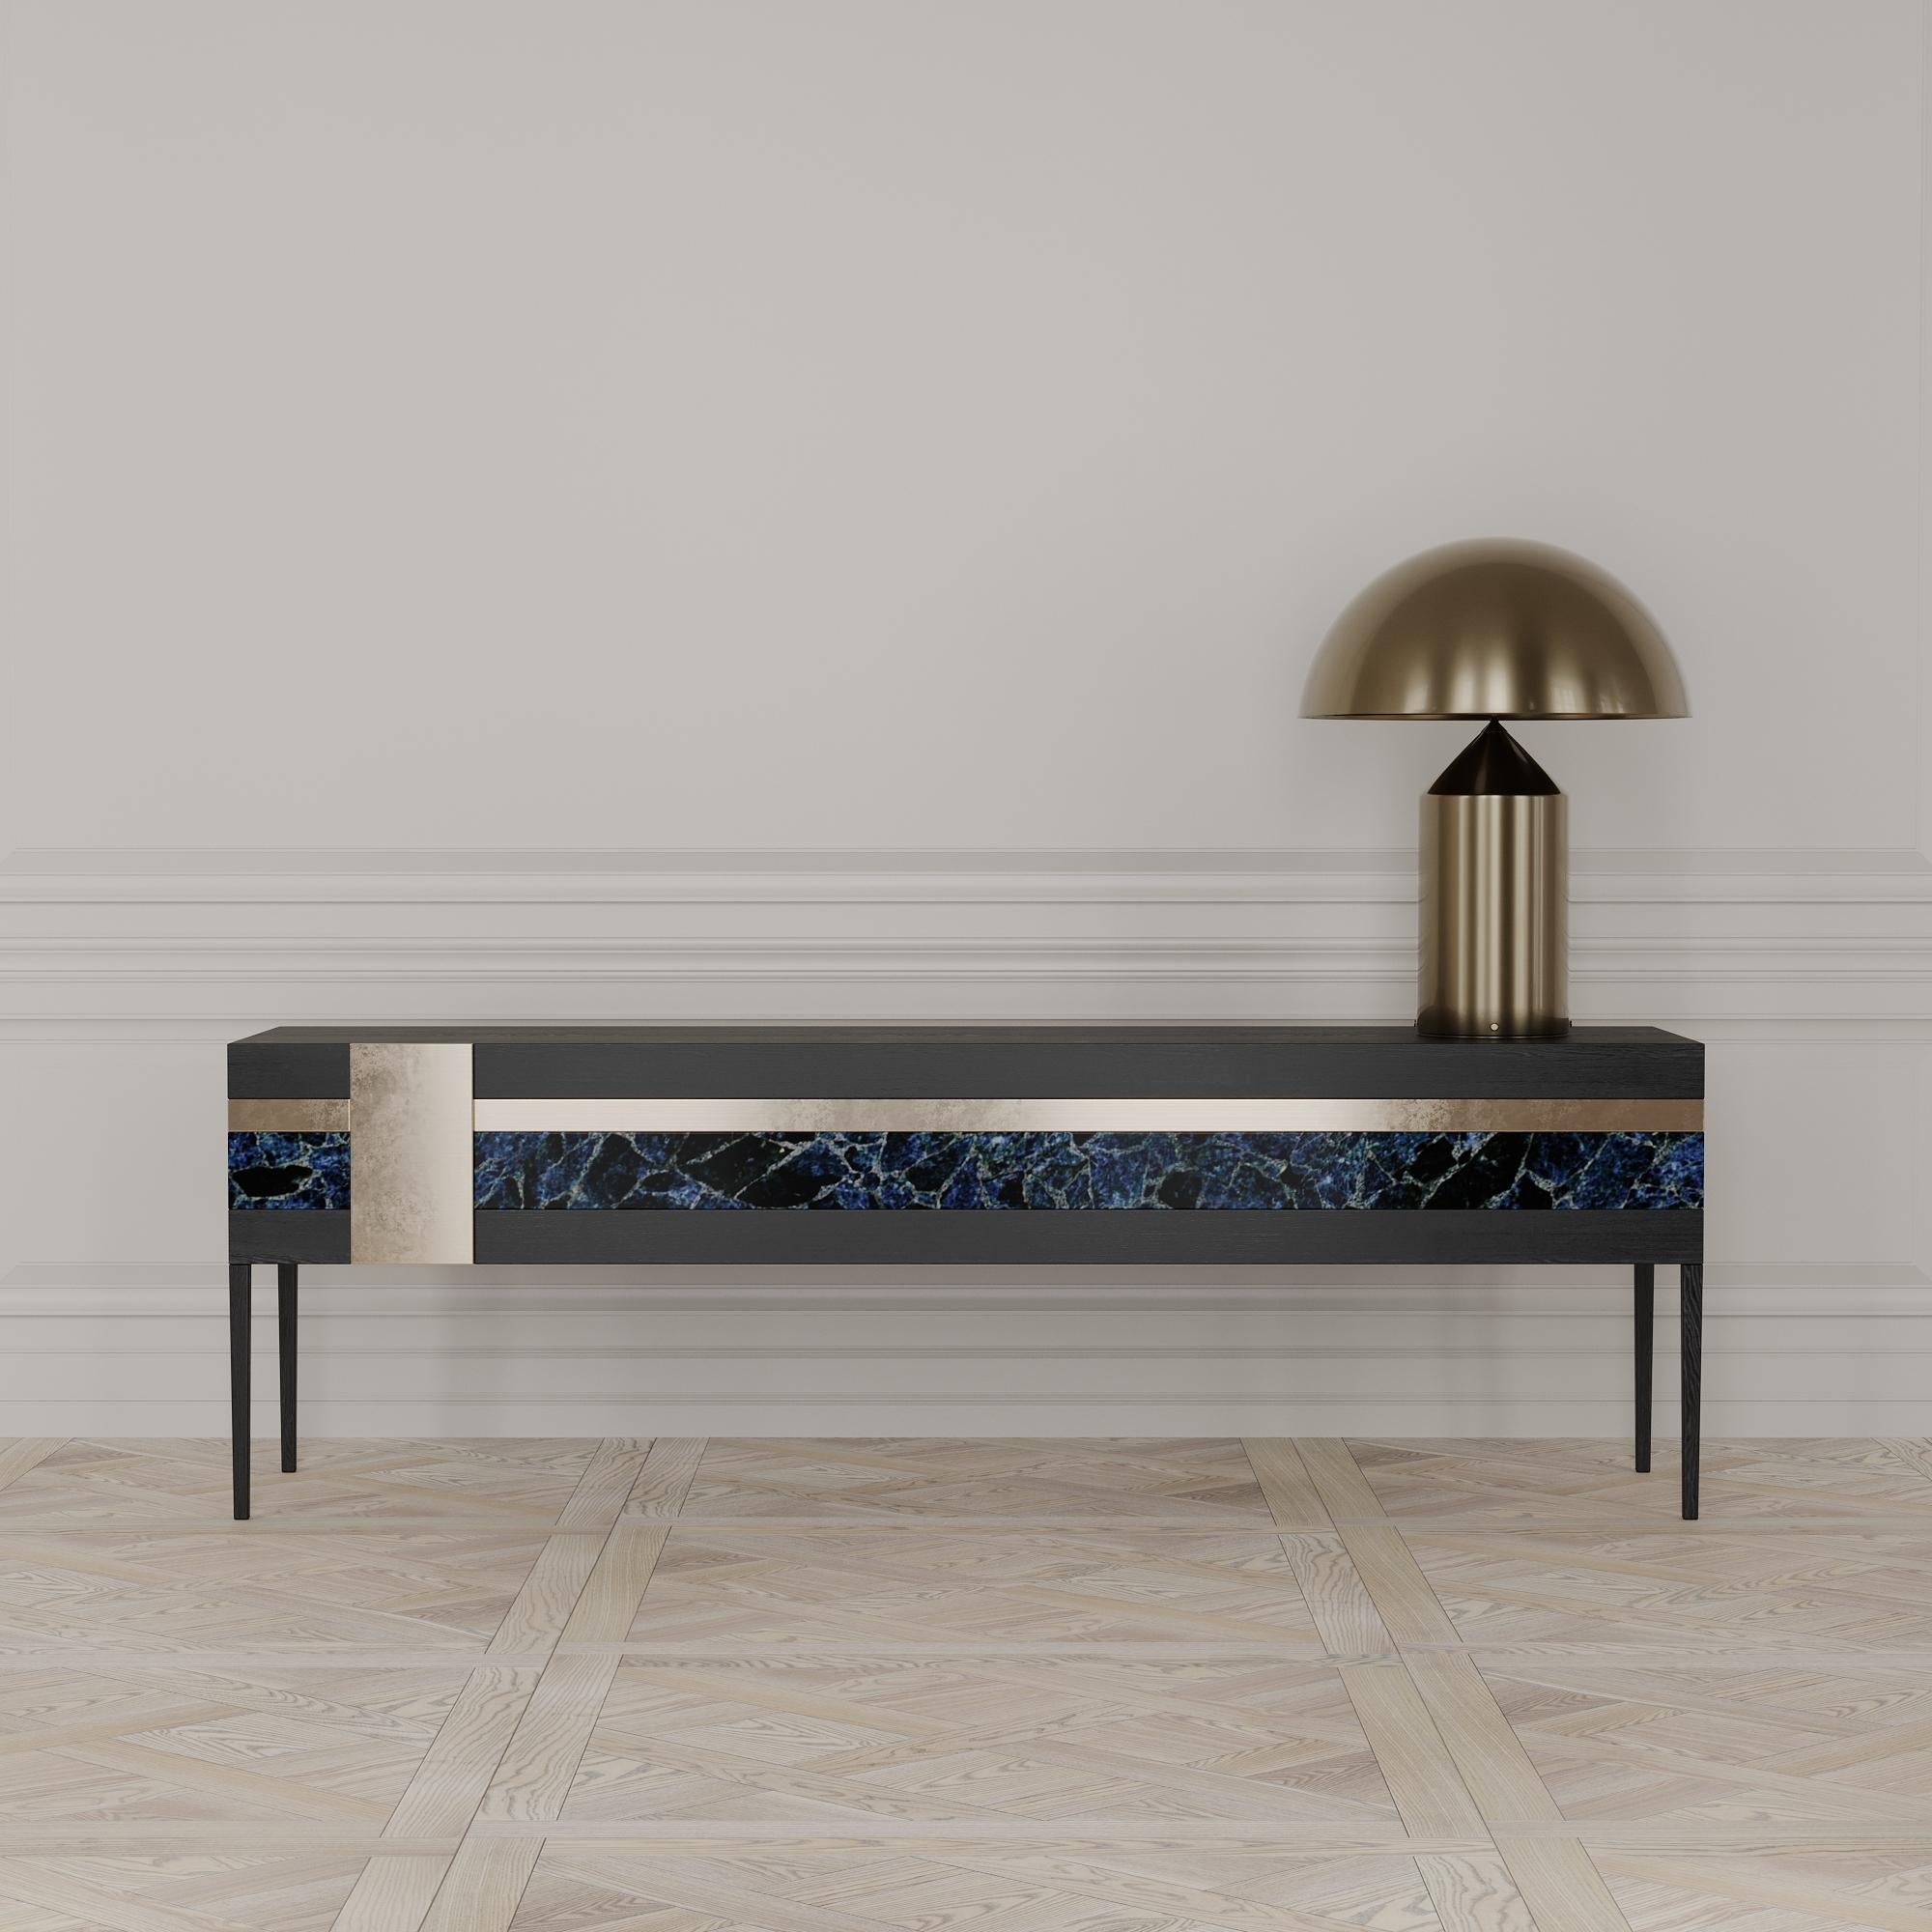 The Moonrise credenza is designed by Emél & Browne in the Minimalist and contemporary style and custom made in Italy by skilled artisans.

The semi-precious gemstone panel of the Moonrise credenza instills the quality of light at dusk. The agate